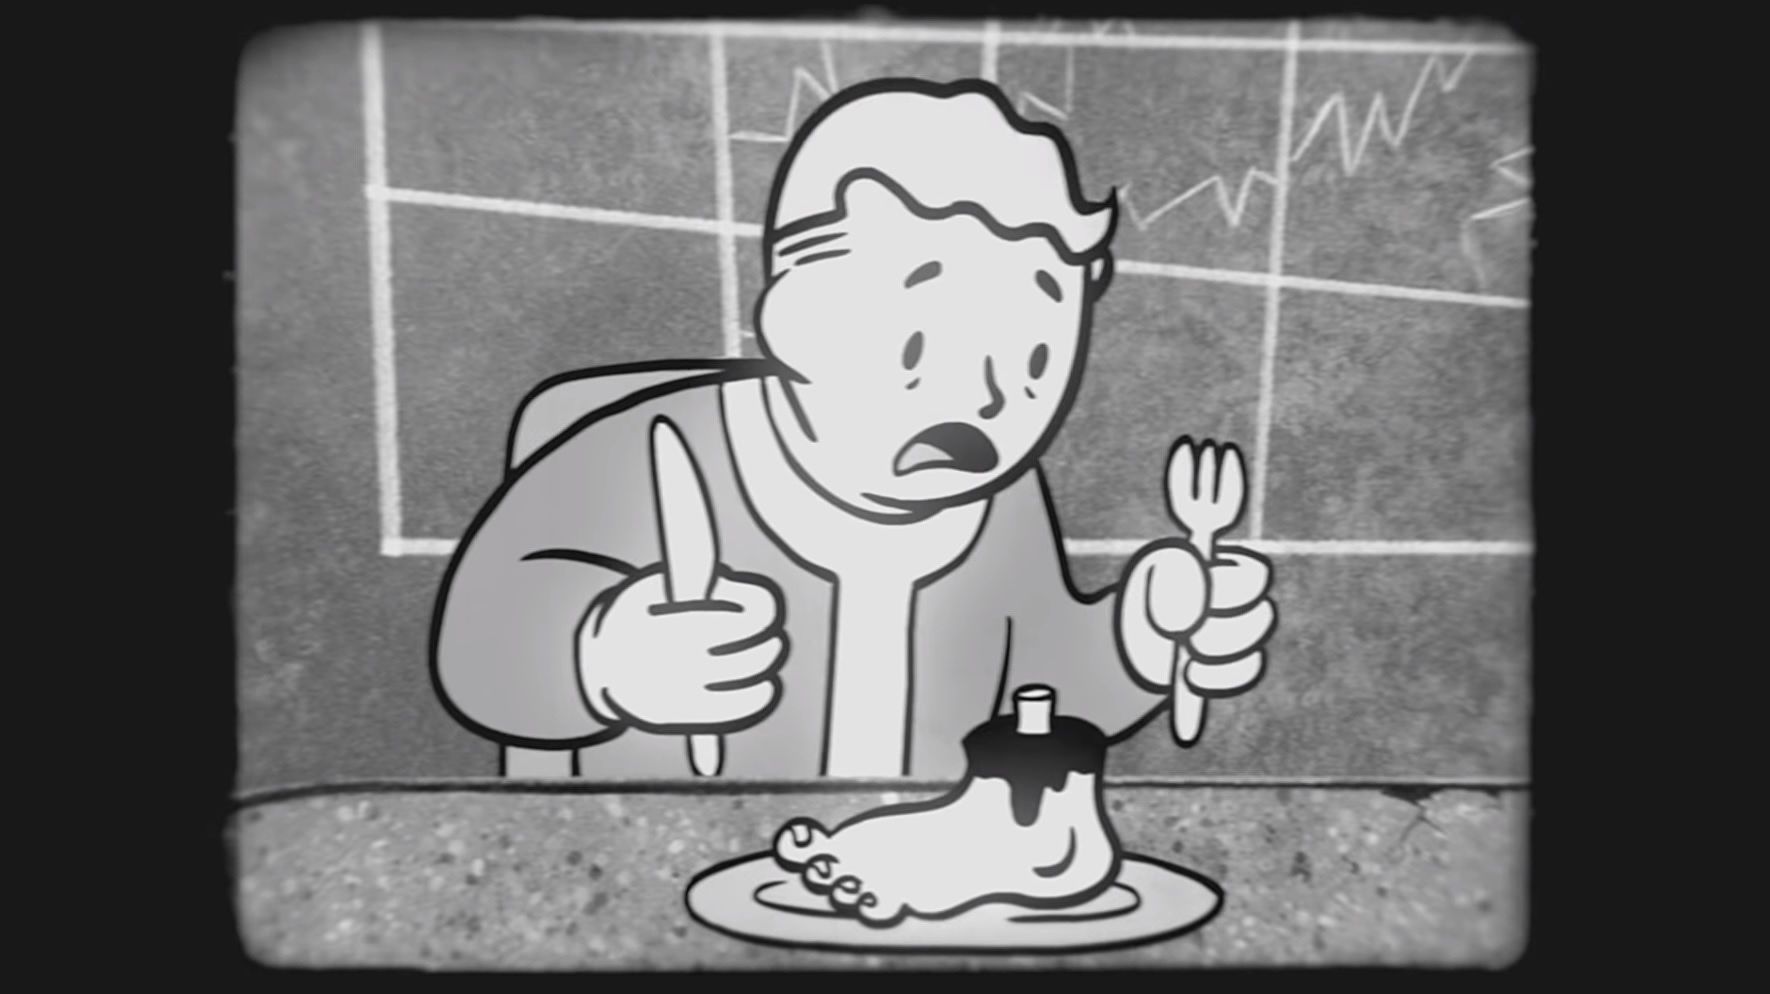 Fallout 3 speedrunner eats a baby in below 20 minutes, in game, clearly